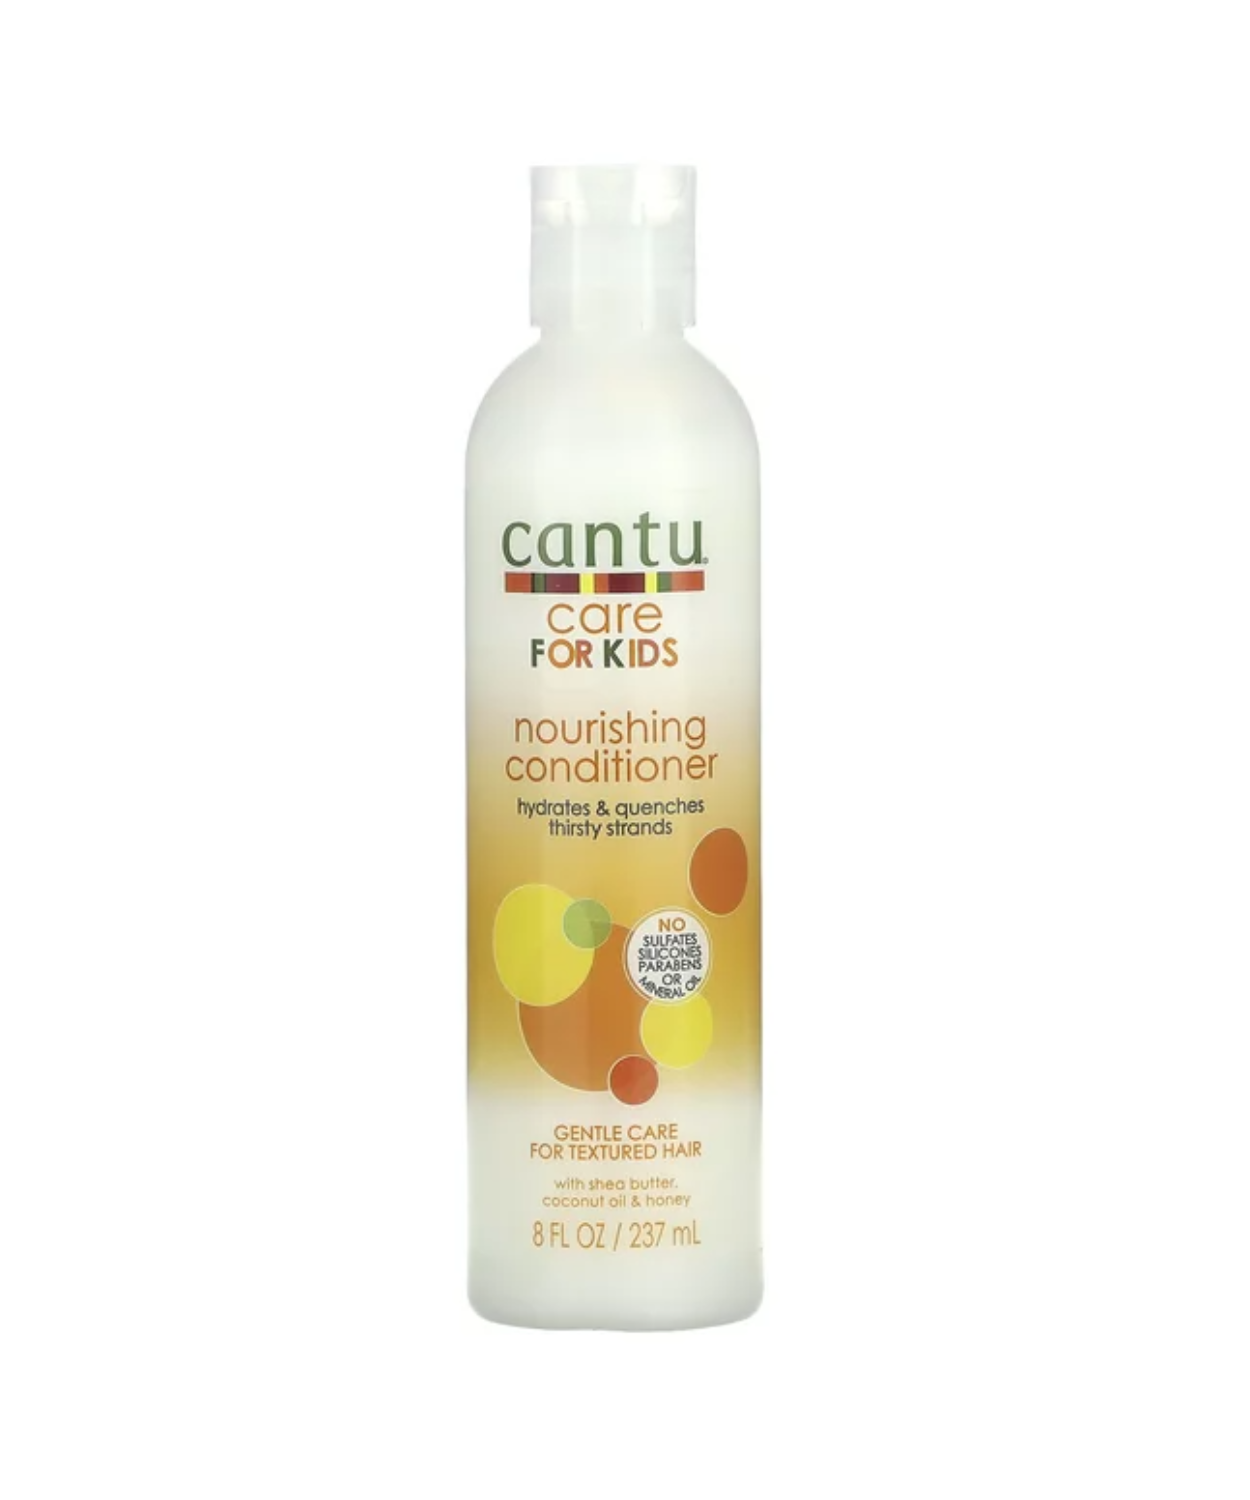 Cantu, Care For Kids, Nourishing Conditioner, For Textured Hair 8 oz - BRAID BEAUTY